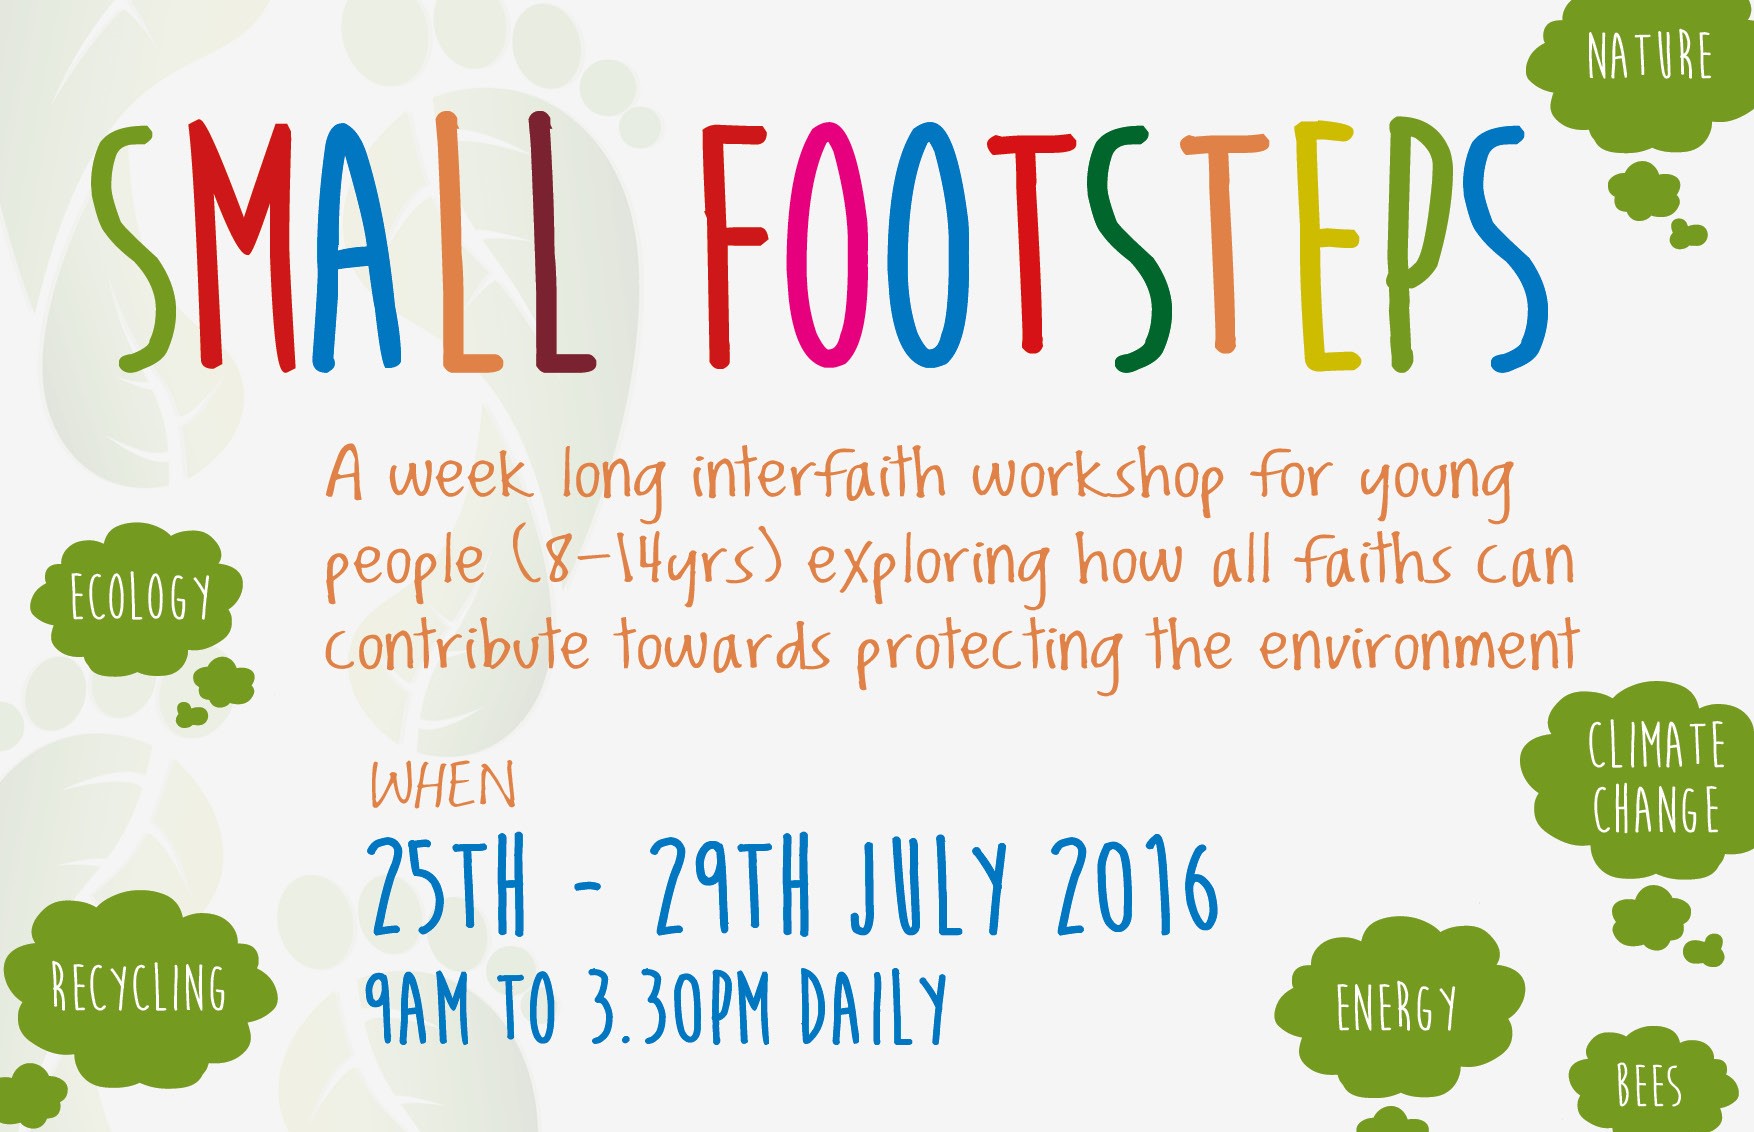 Small Footsteps event for young people